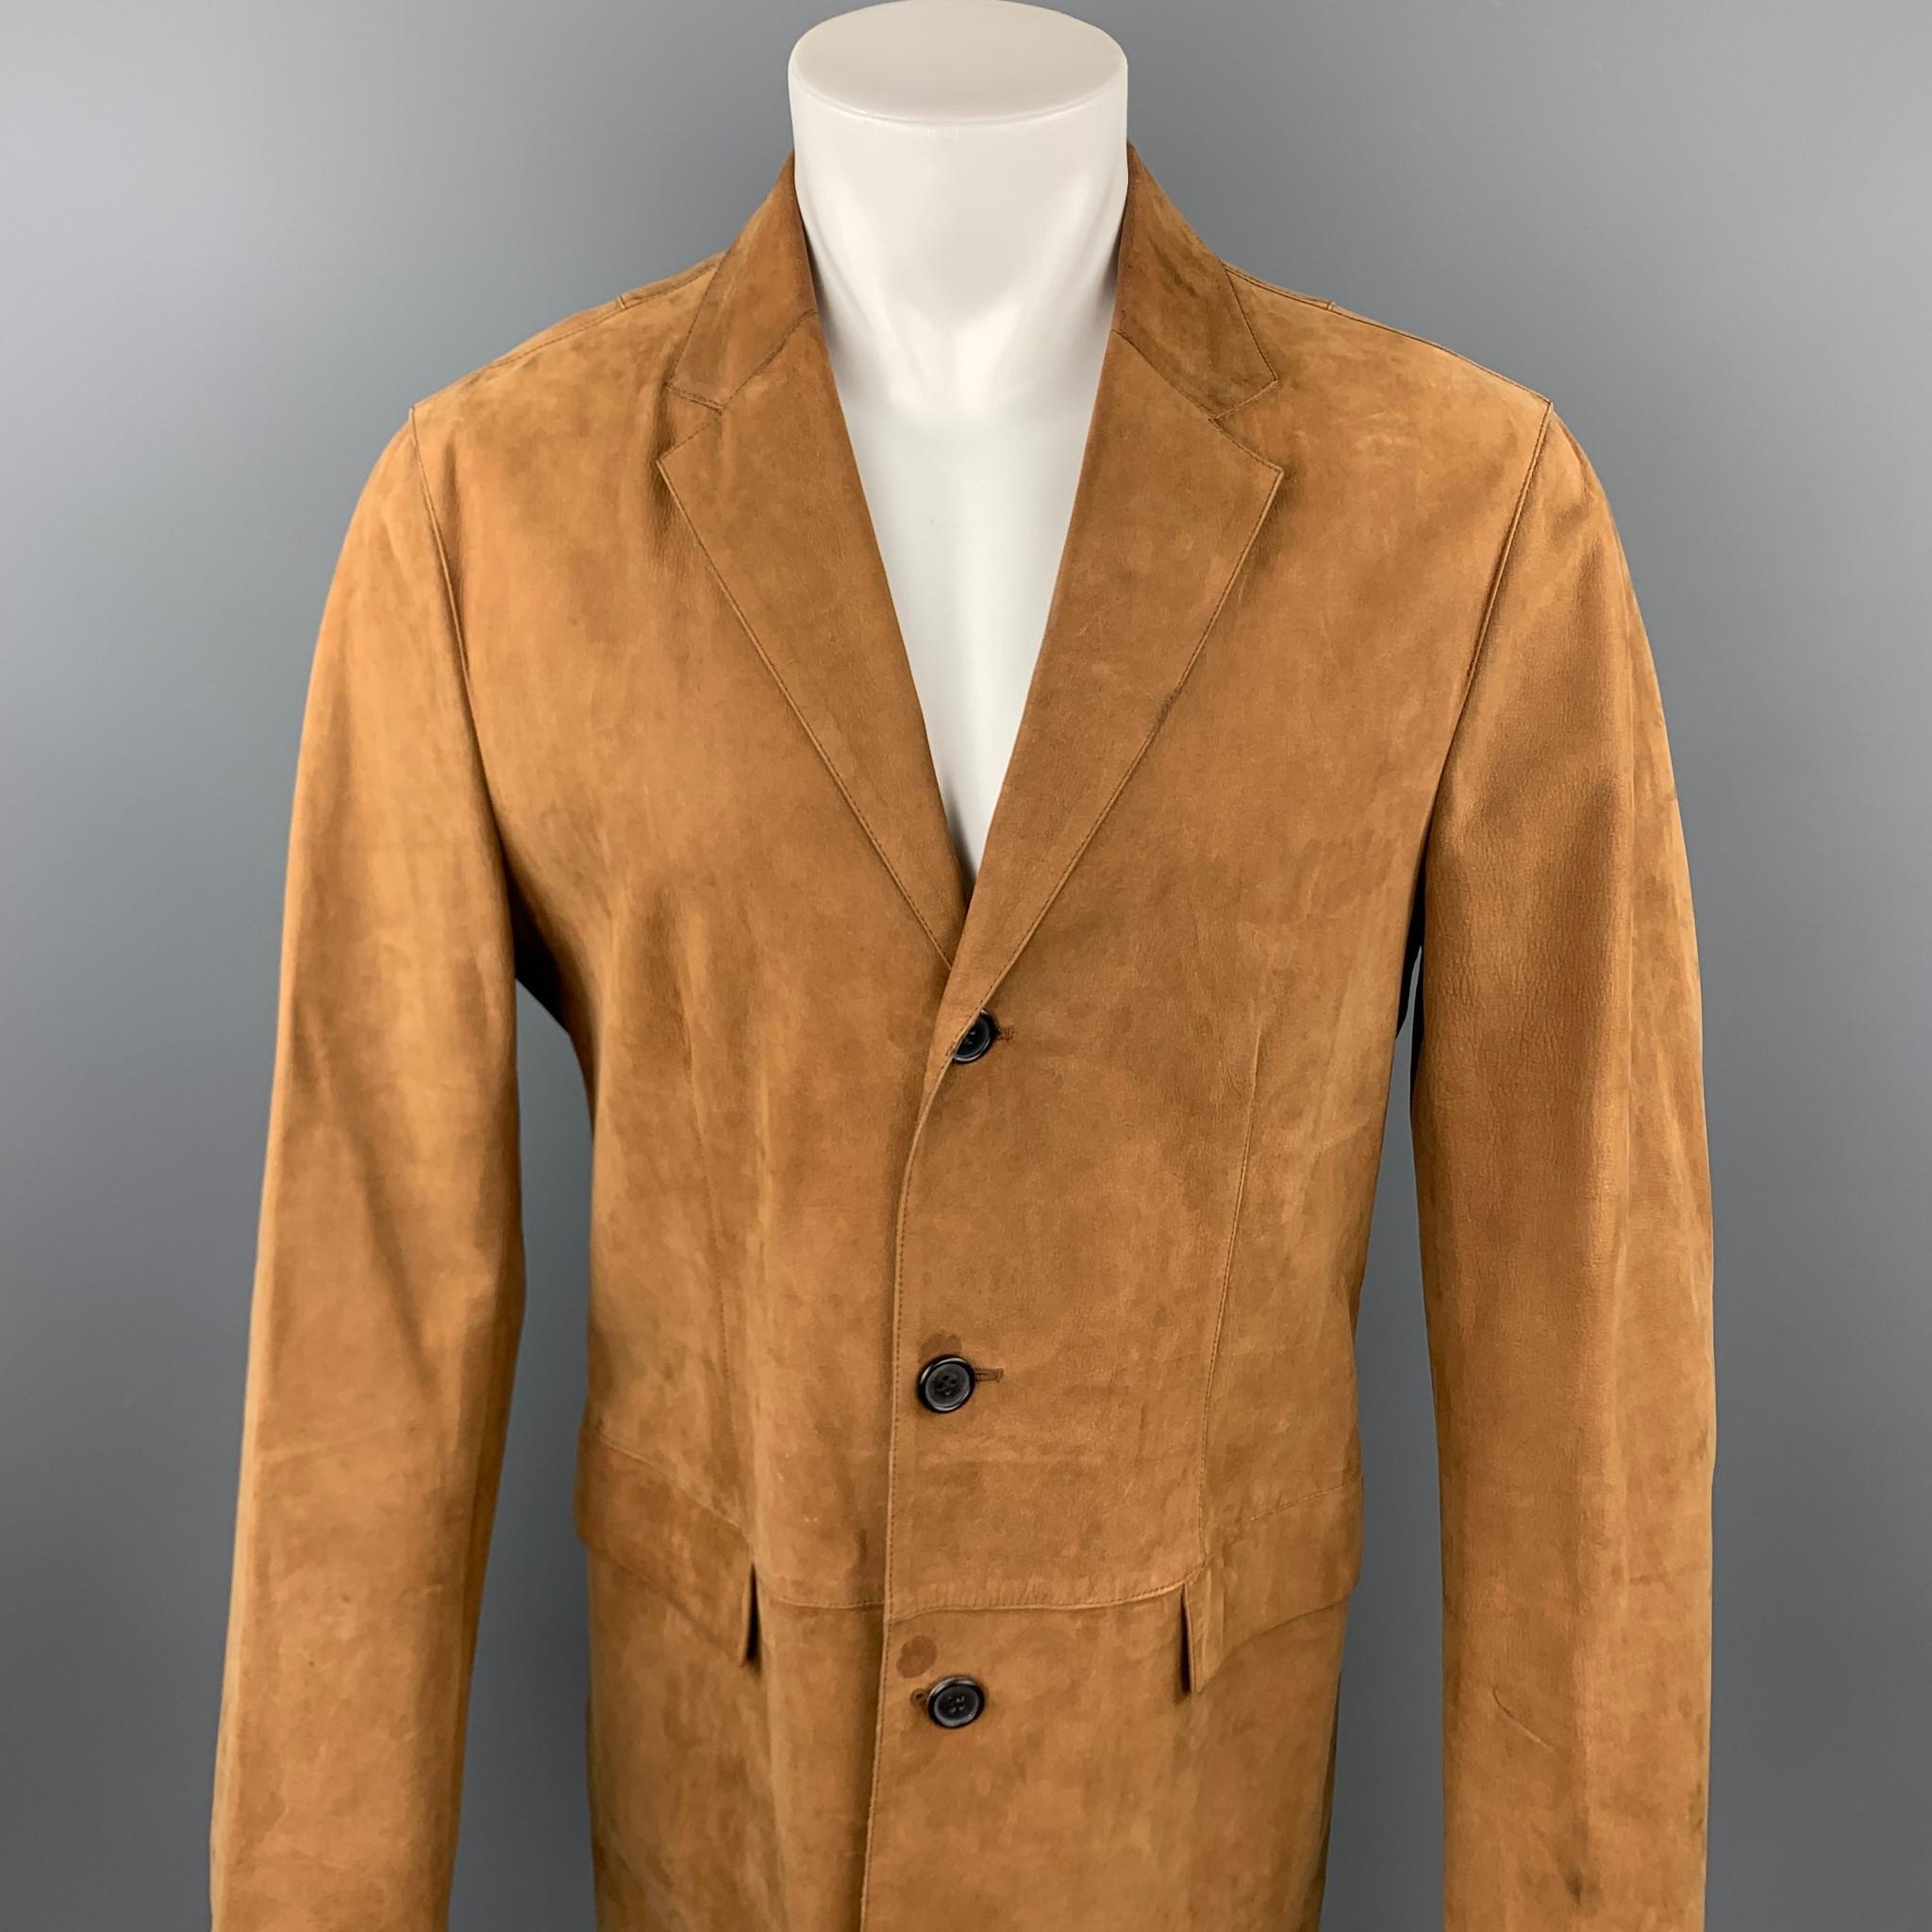 NEIL BARRETT coat comes in a brown leather featuring a notch lapel, flap pockets, and a buttoned closure. Wear on sleeve. Made in Italy.

Good Pre-Owned Condition.
Marked: M

Measurements:

Shoulder: 18.5 in. 
Chest: 42 in. 
Sleeve: 27 in. 
Length: